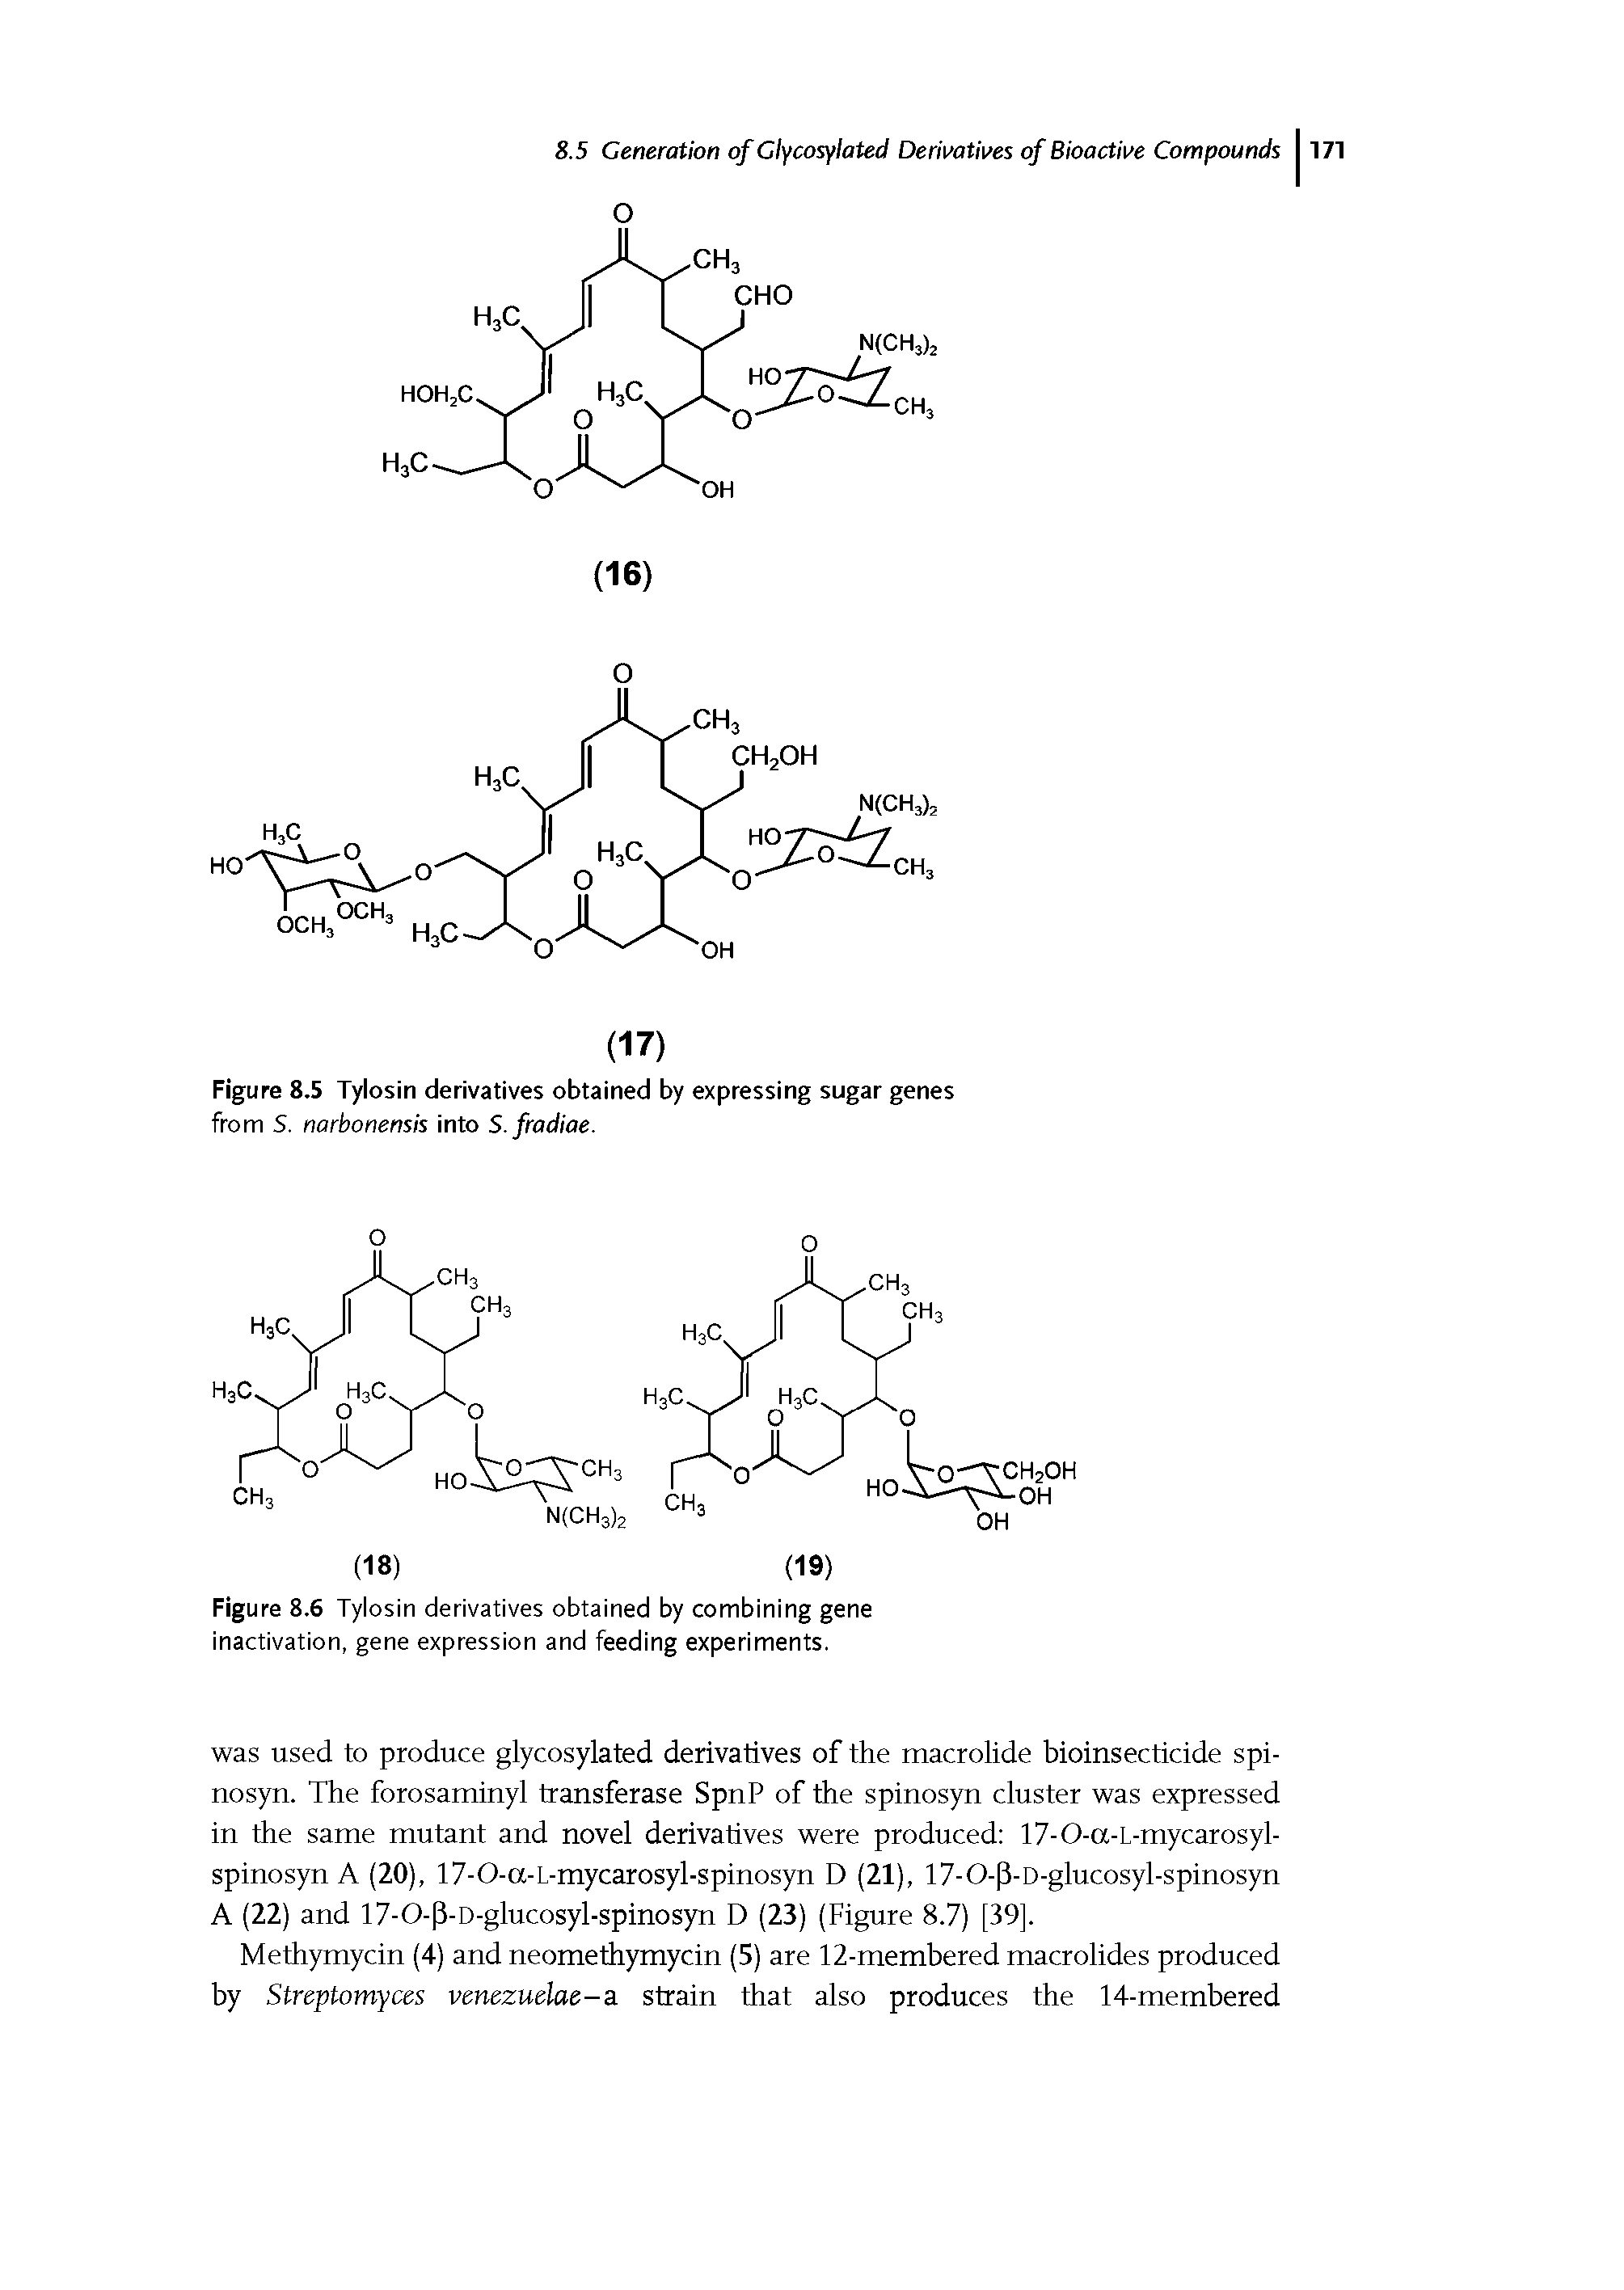 Figure 8.5 Tylosin derivatives obtained by expressing sugar genes...